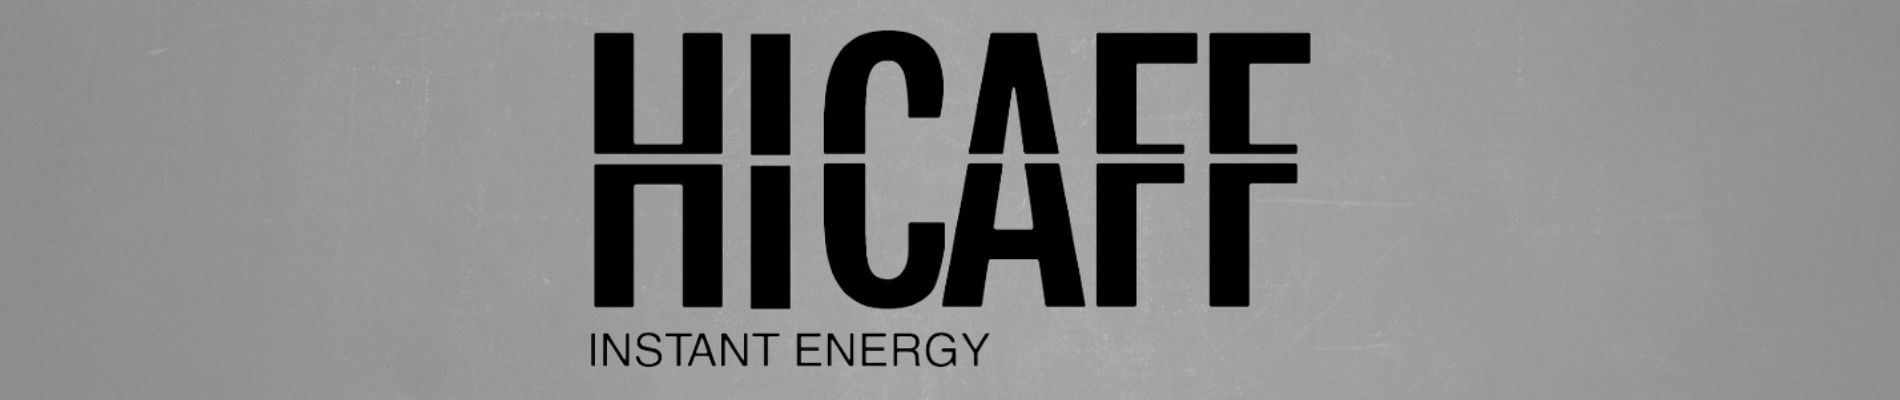 Hicaff Instant Energy Caffeine Pouches